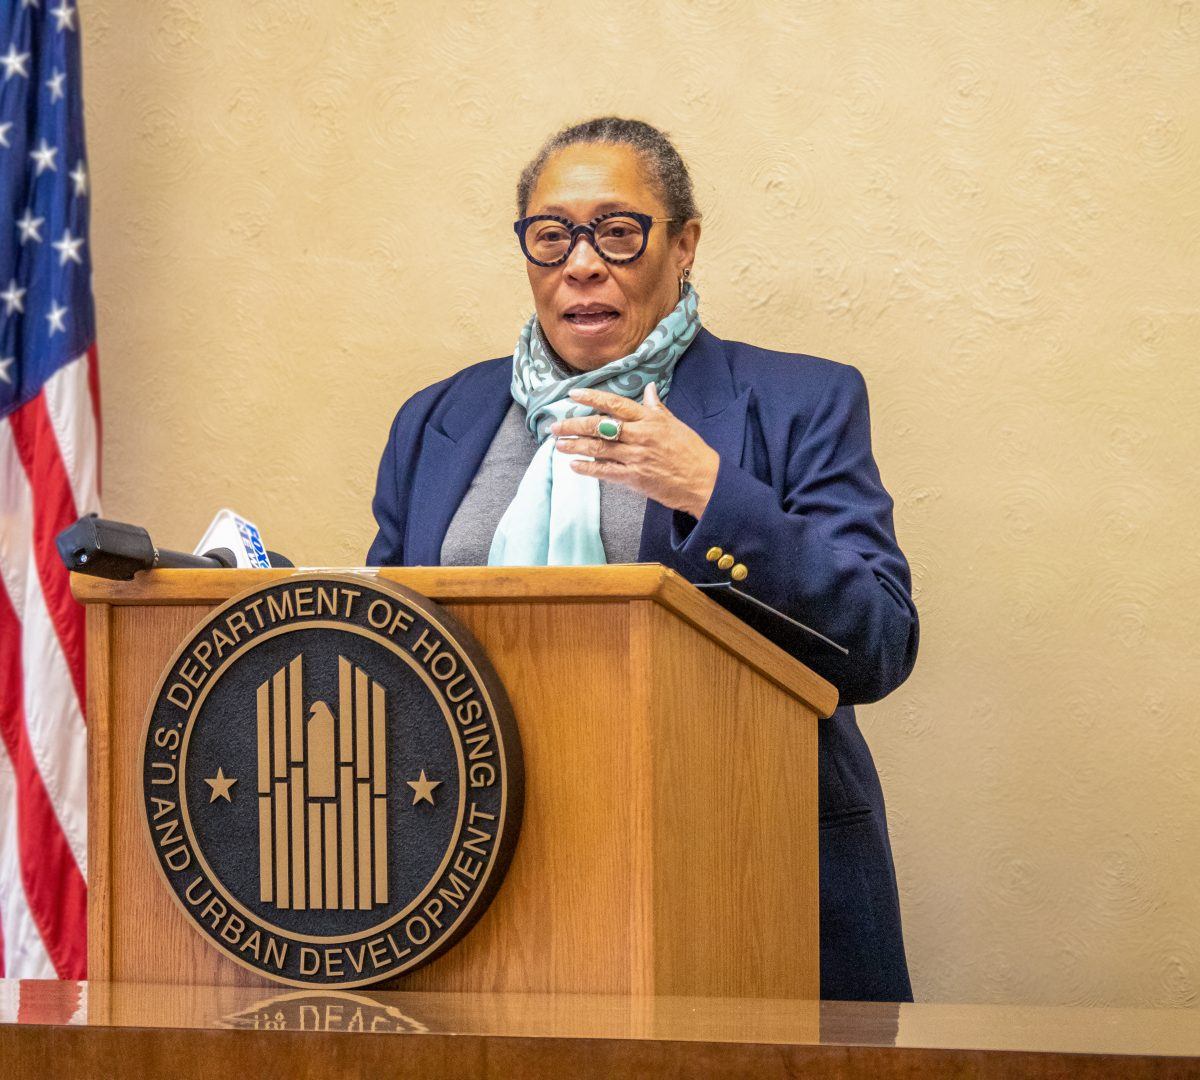 A woman is speaking at a podium that has U.S Department of Housing and Urban Development written on the front it. There is a tan wall behind her and an American flag.